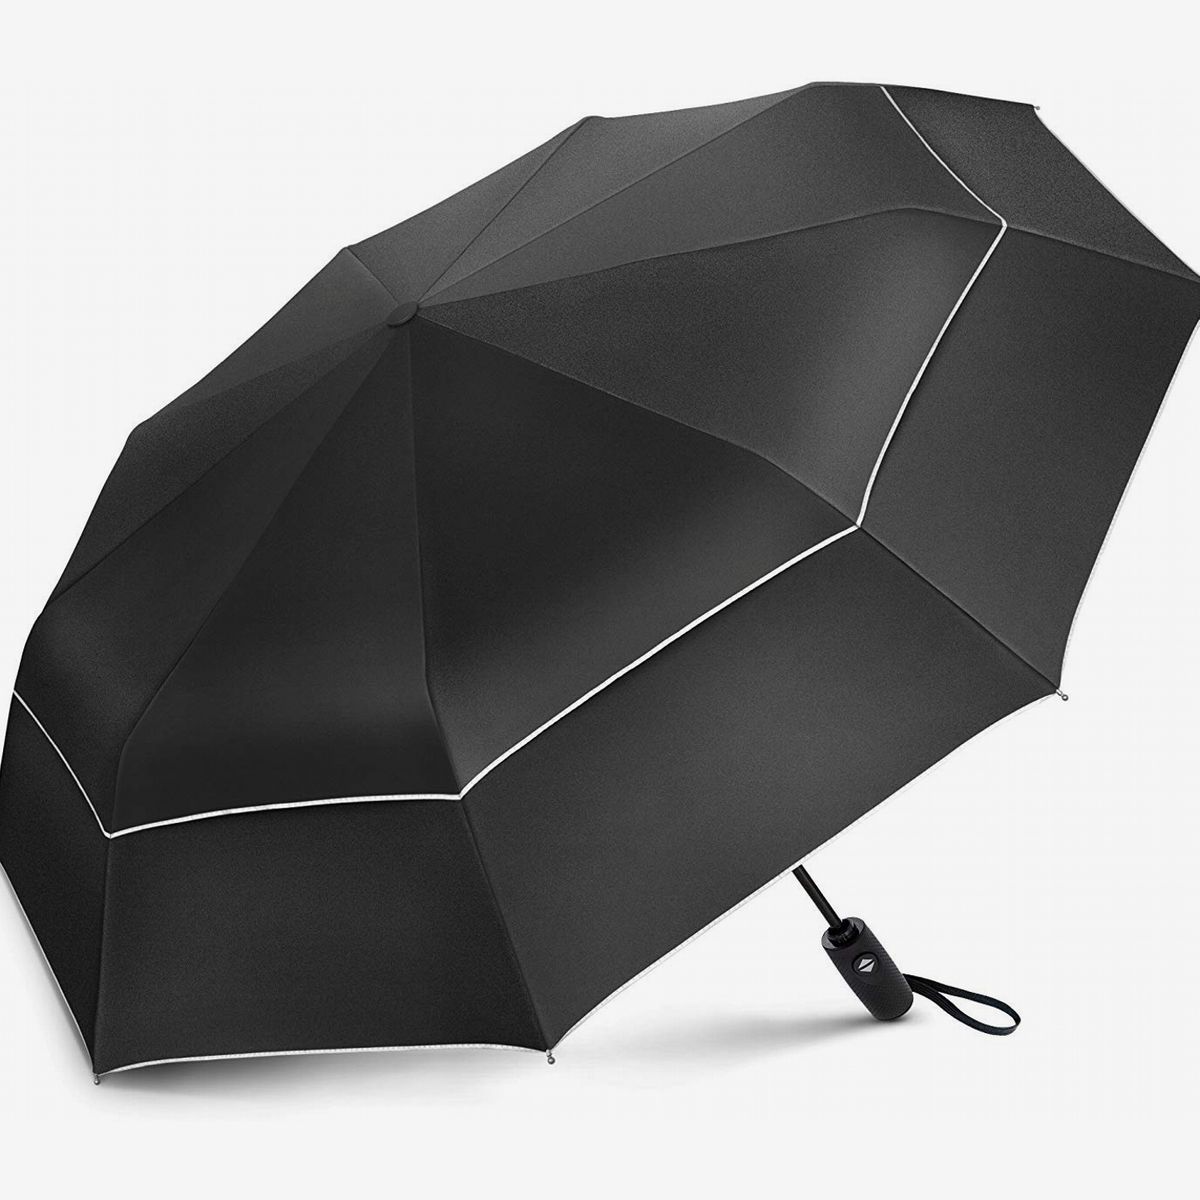 Large long windproof black umbrella with strong c curve handle classic trendy